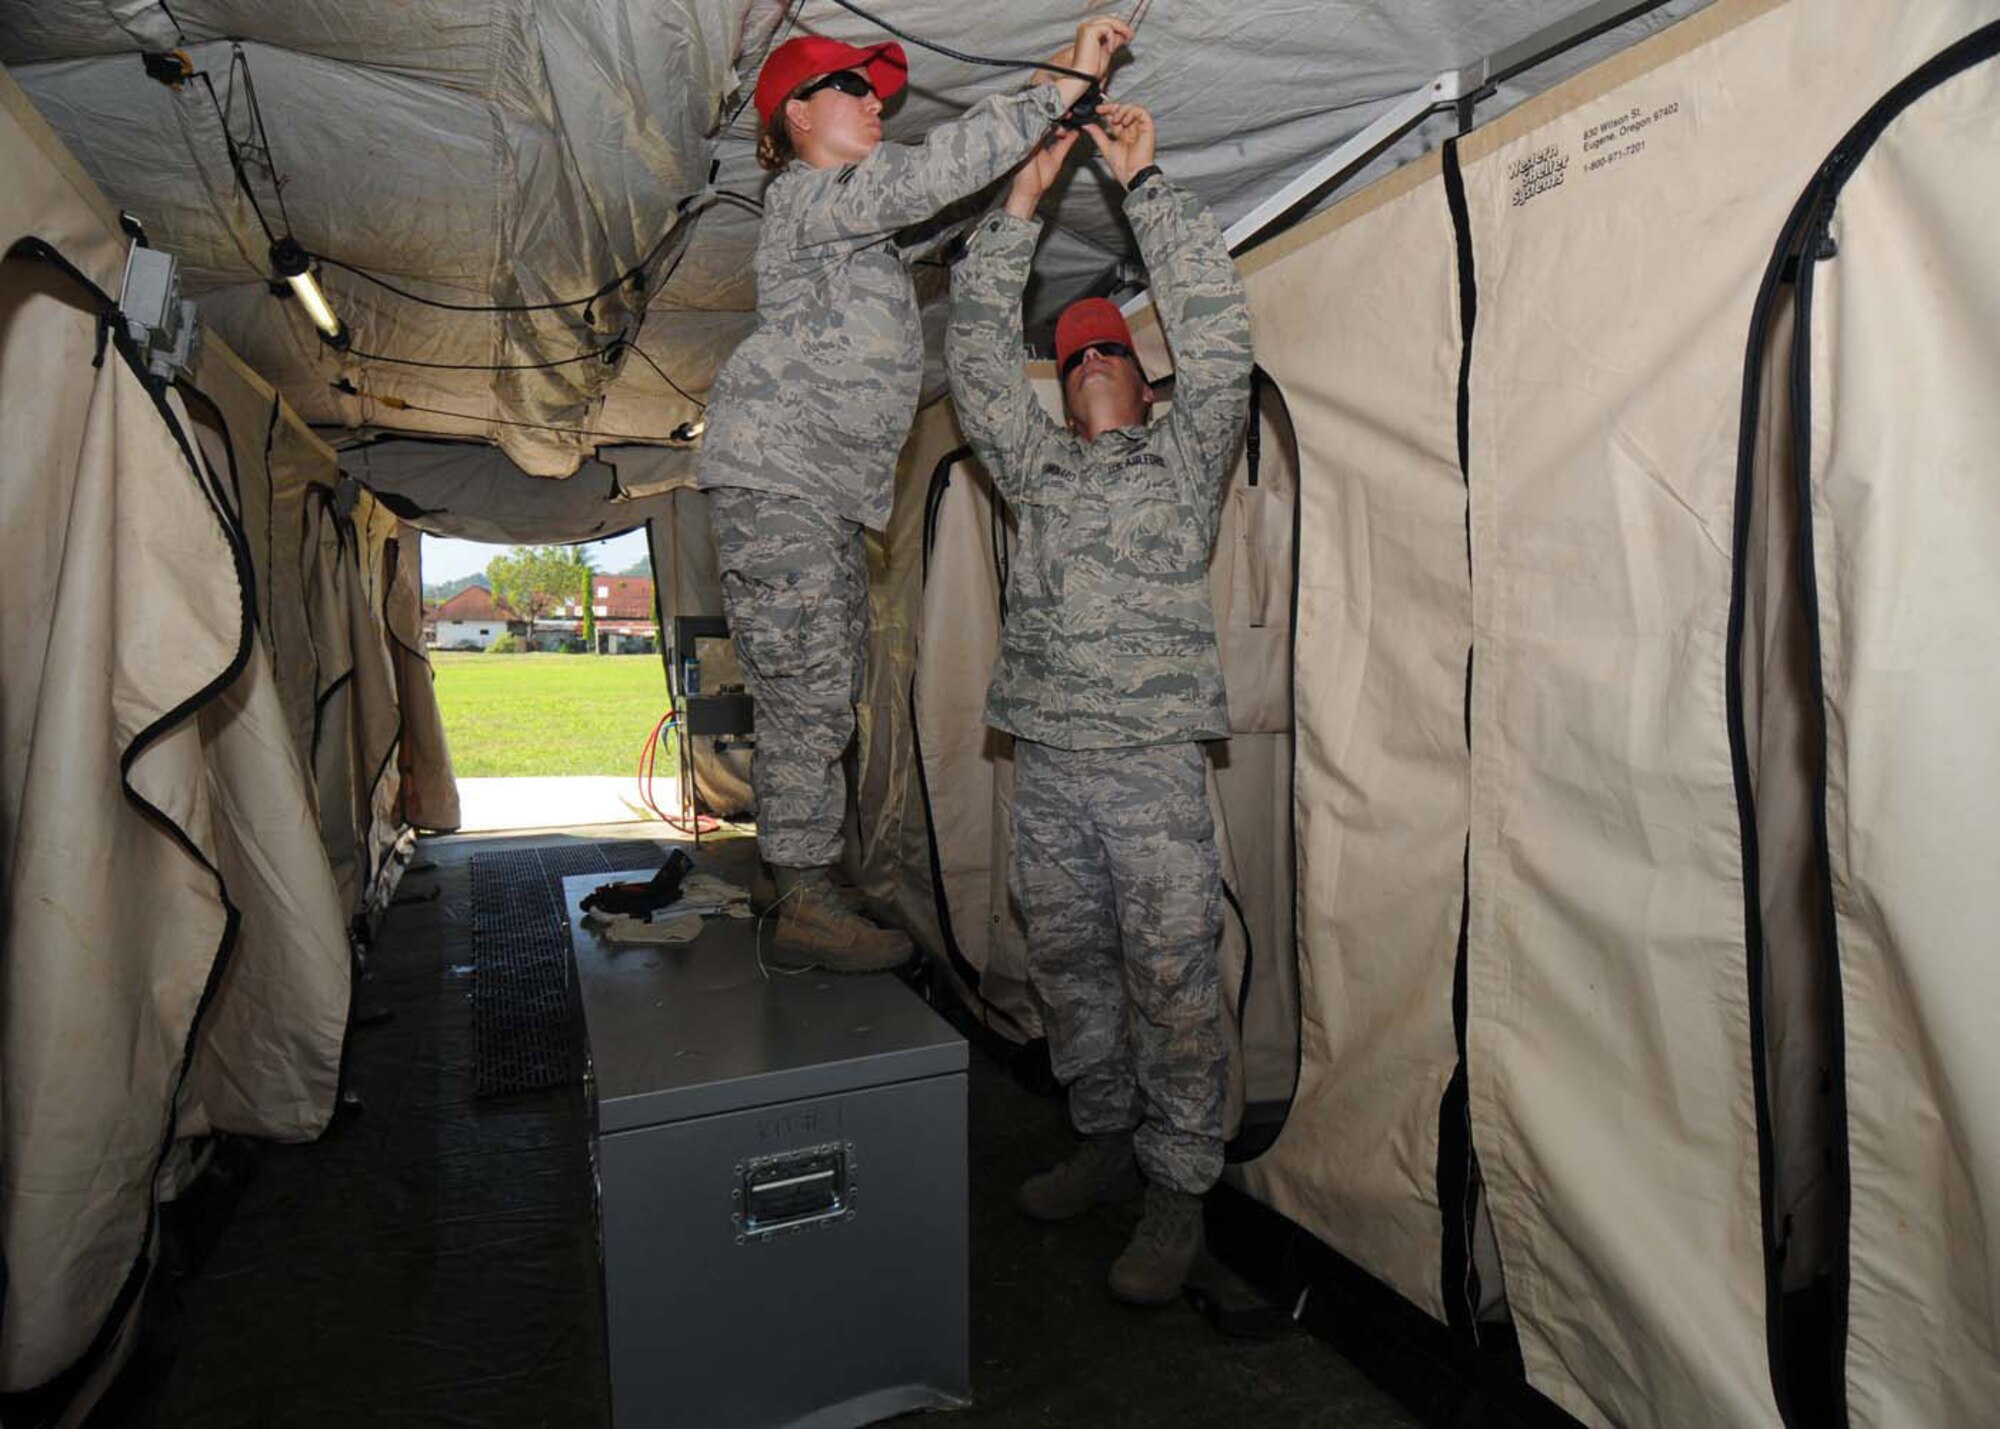 PADANG, Indonesia -- Staff Sgt. Amanda Arndt (left) and Tech. Sgt. Eric Menard install lighting fixtures inside a shower unit to support a U.S. Air Force humanitarian assistance rapid response team Oct. 9. Sergeants Arndt and Menard are from the 554th RED HORSE Squadron at Andersen Air Force Base, Guam, and are deployed here with the HARRT. The squadron provides the Air Force with a highly mobile civil engineering response force to support contingency and special operations worldwide. (U.S. Air Force photo/Staff Sgt. Veronica Pierce)